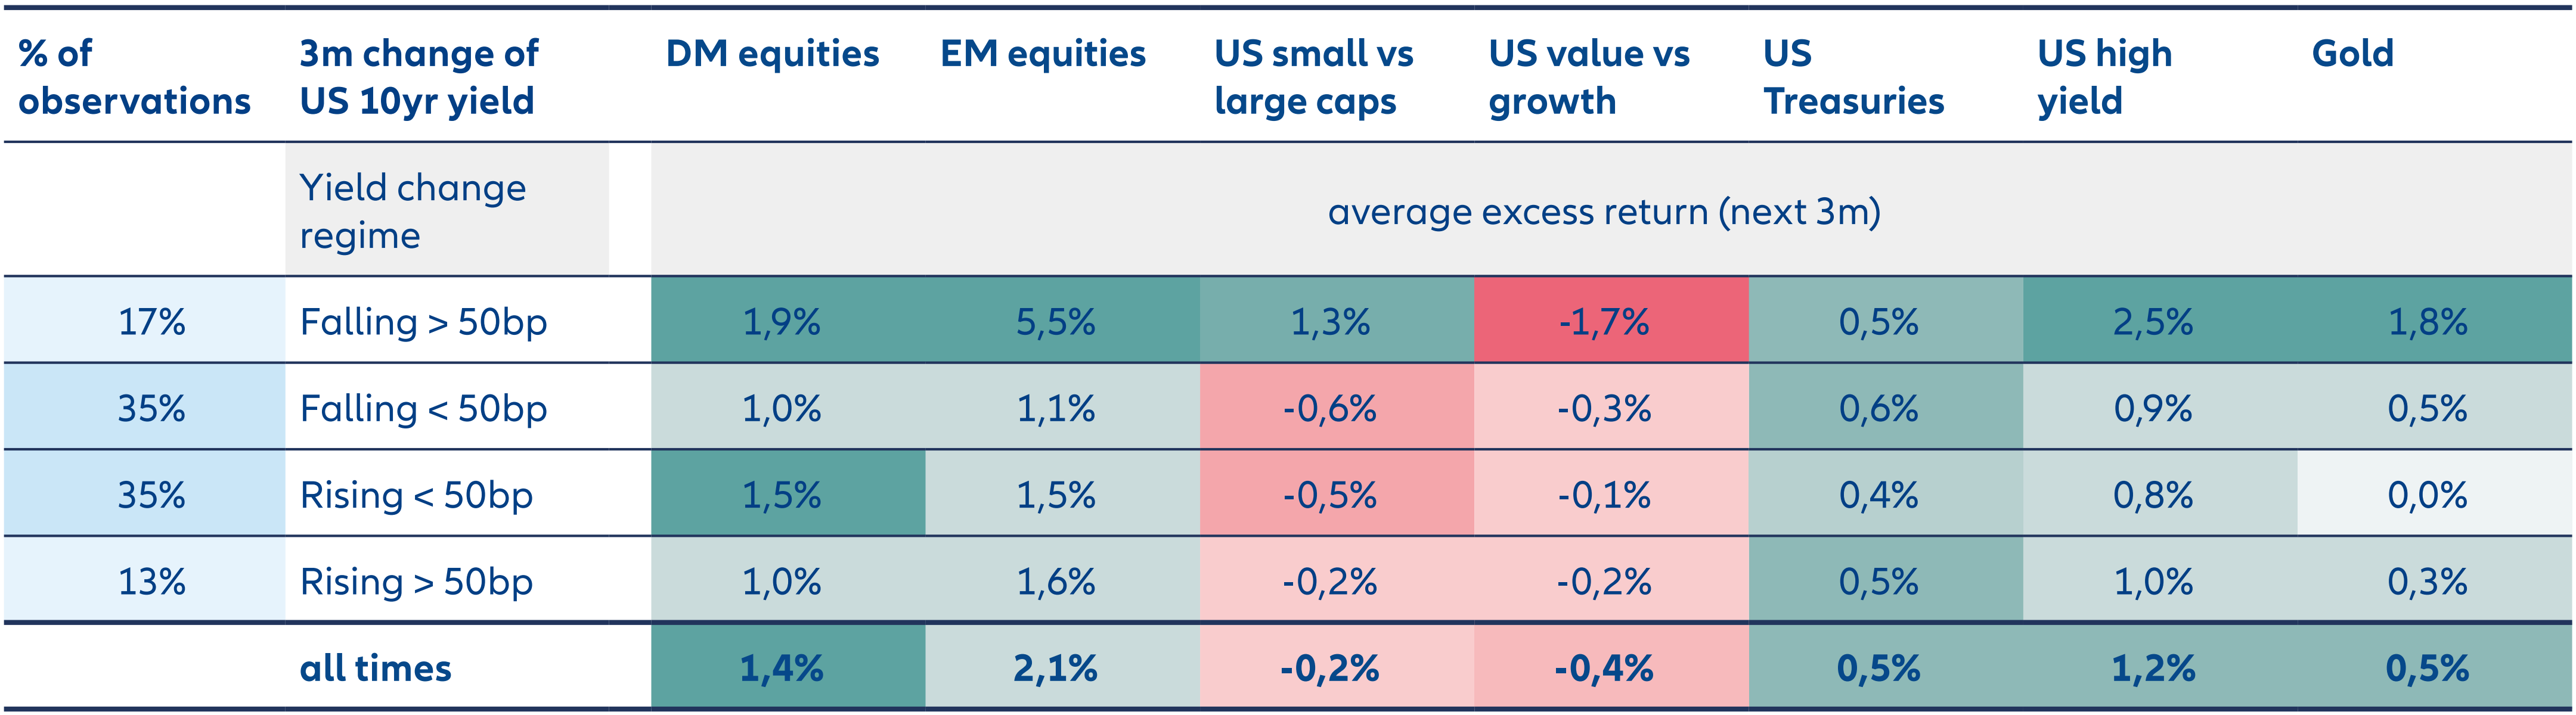 Exhibit 1: Asset classes respond differently to yield regimes